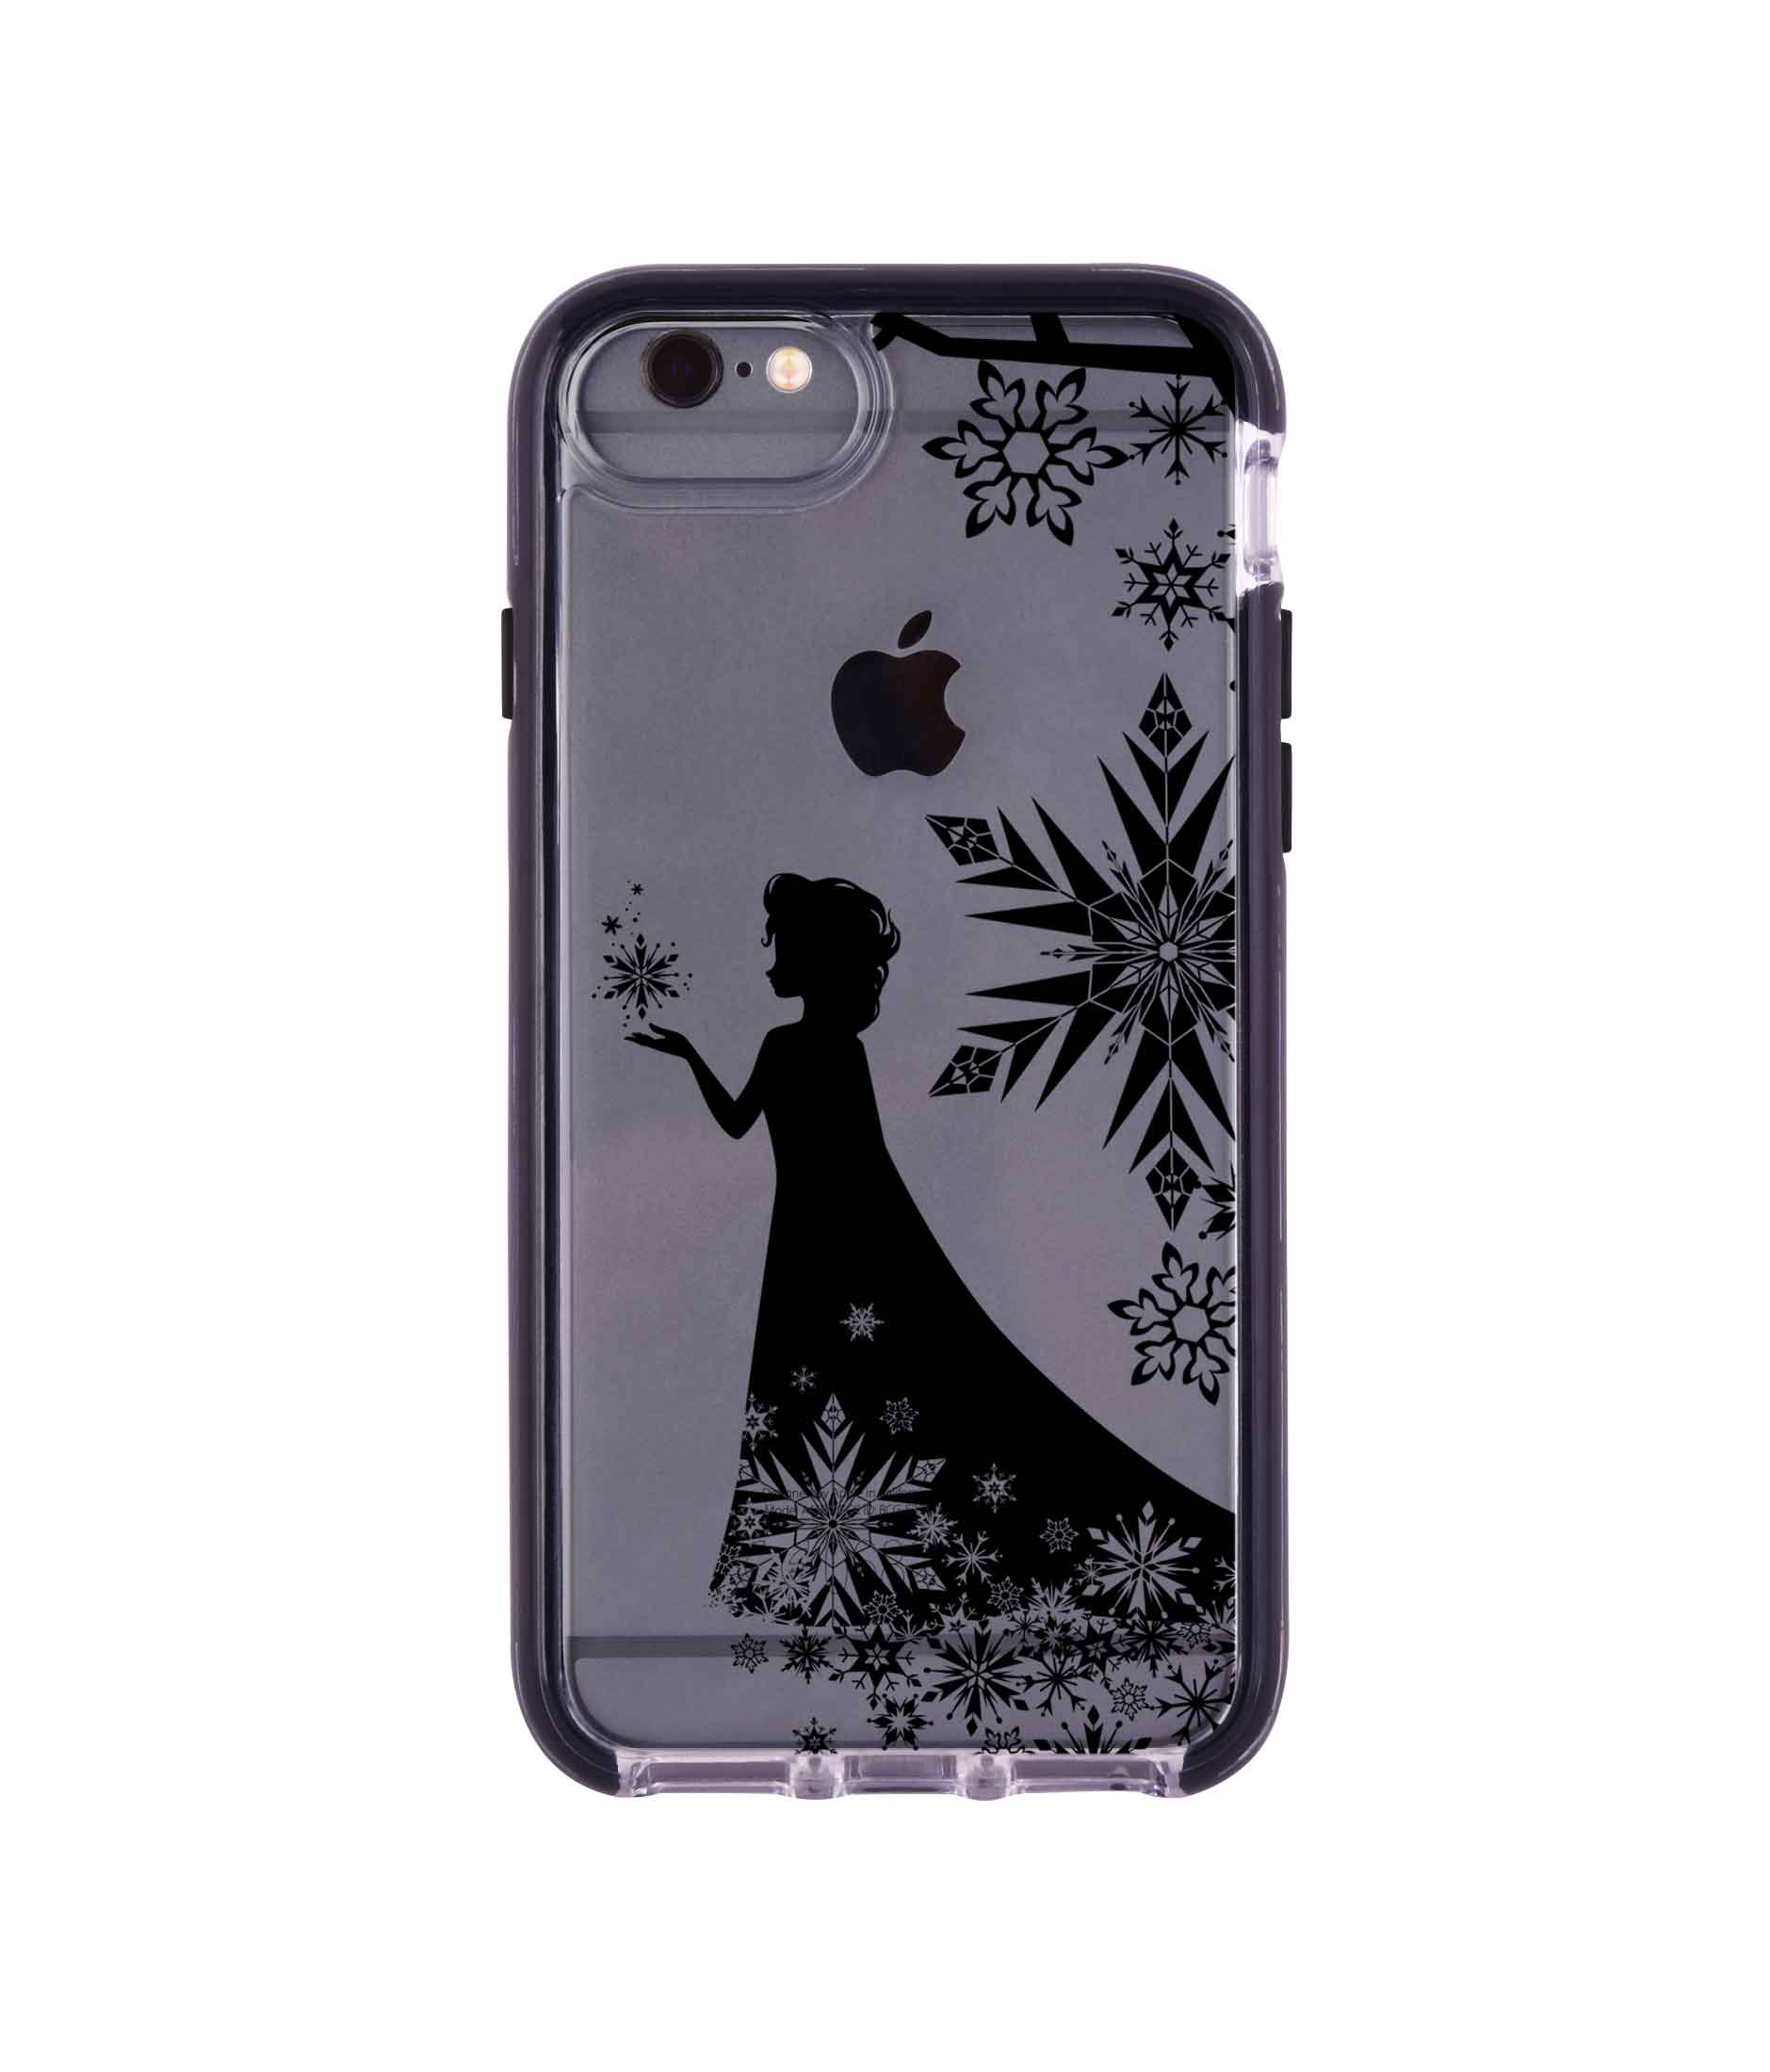 Elsa Silhouette - Extreme Phone Case for iPhone 6